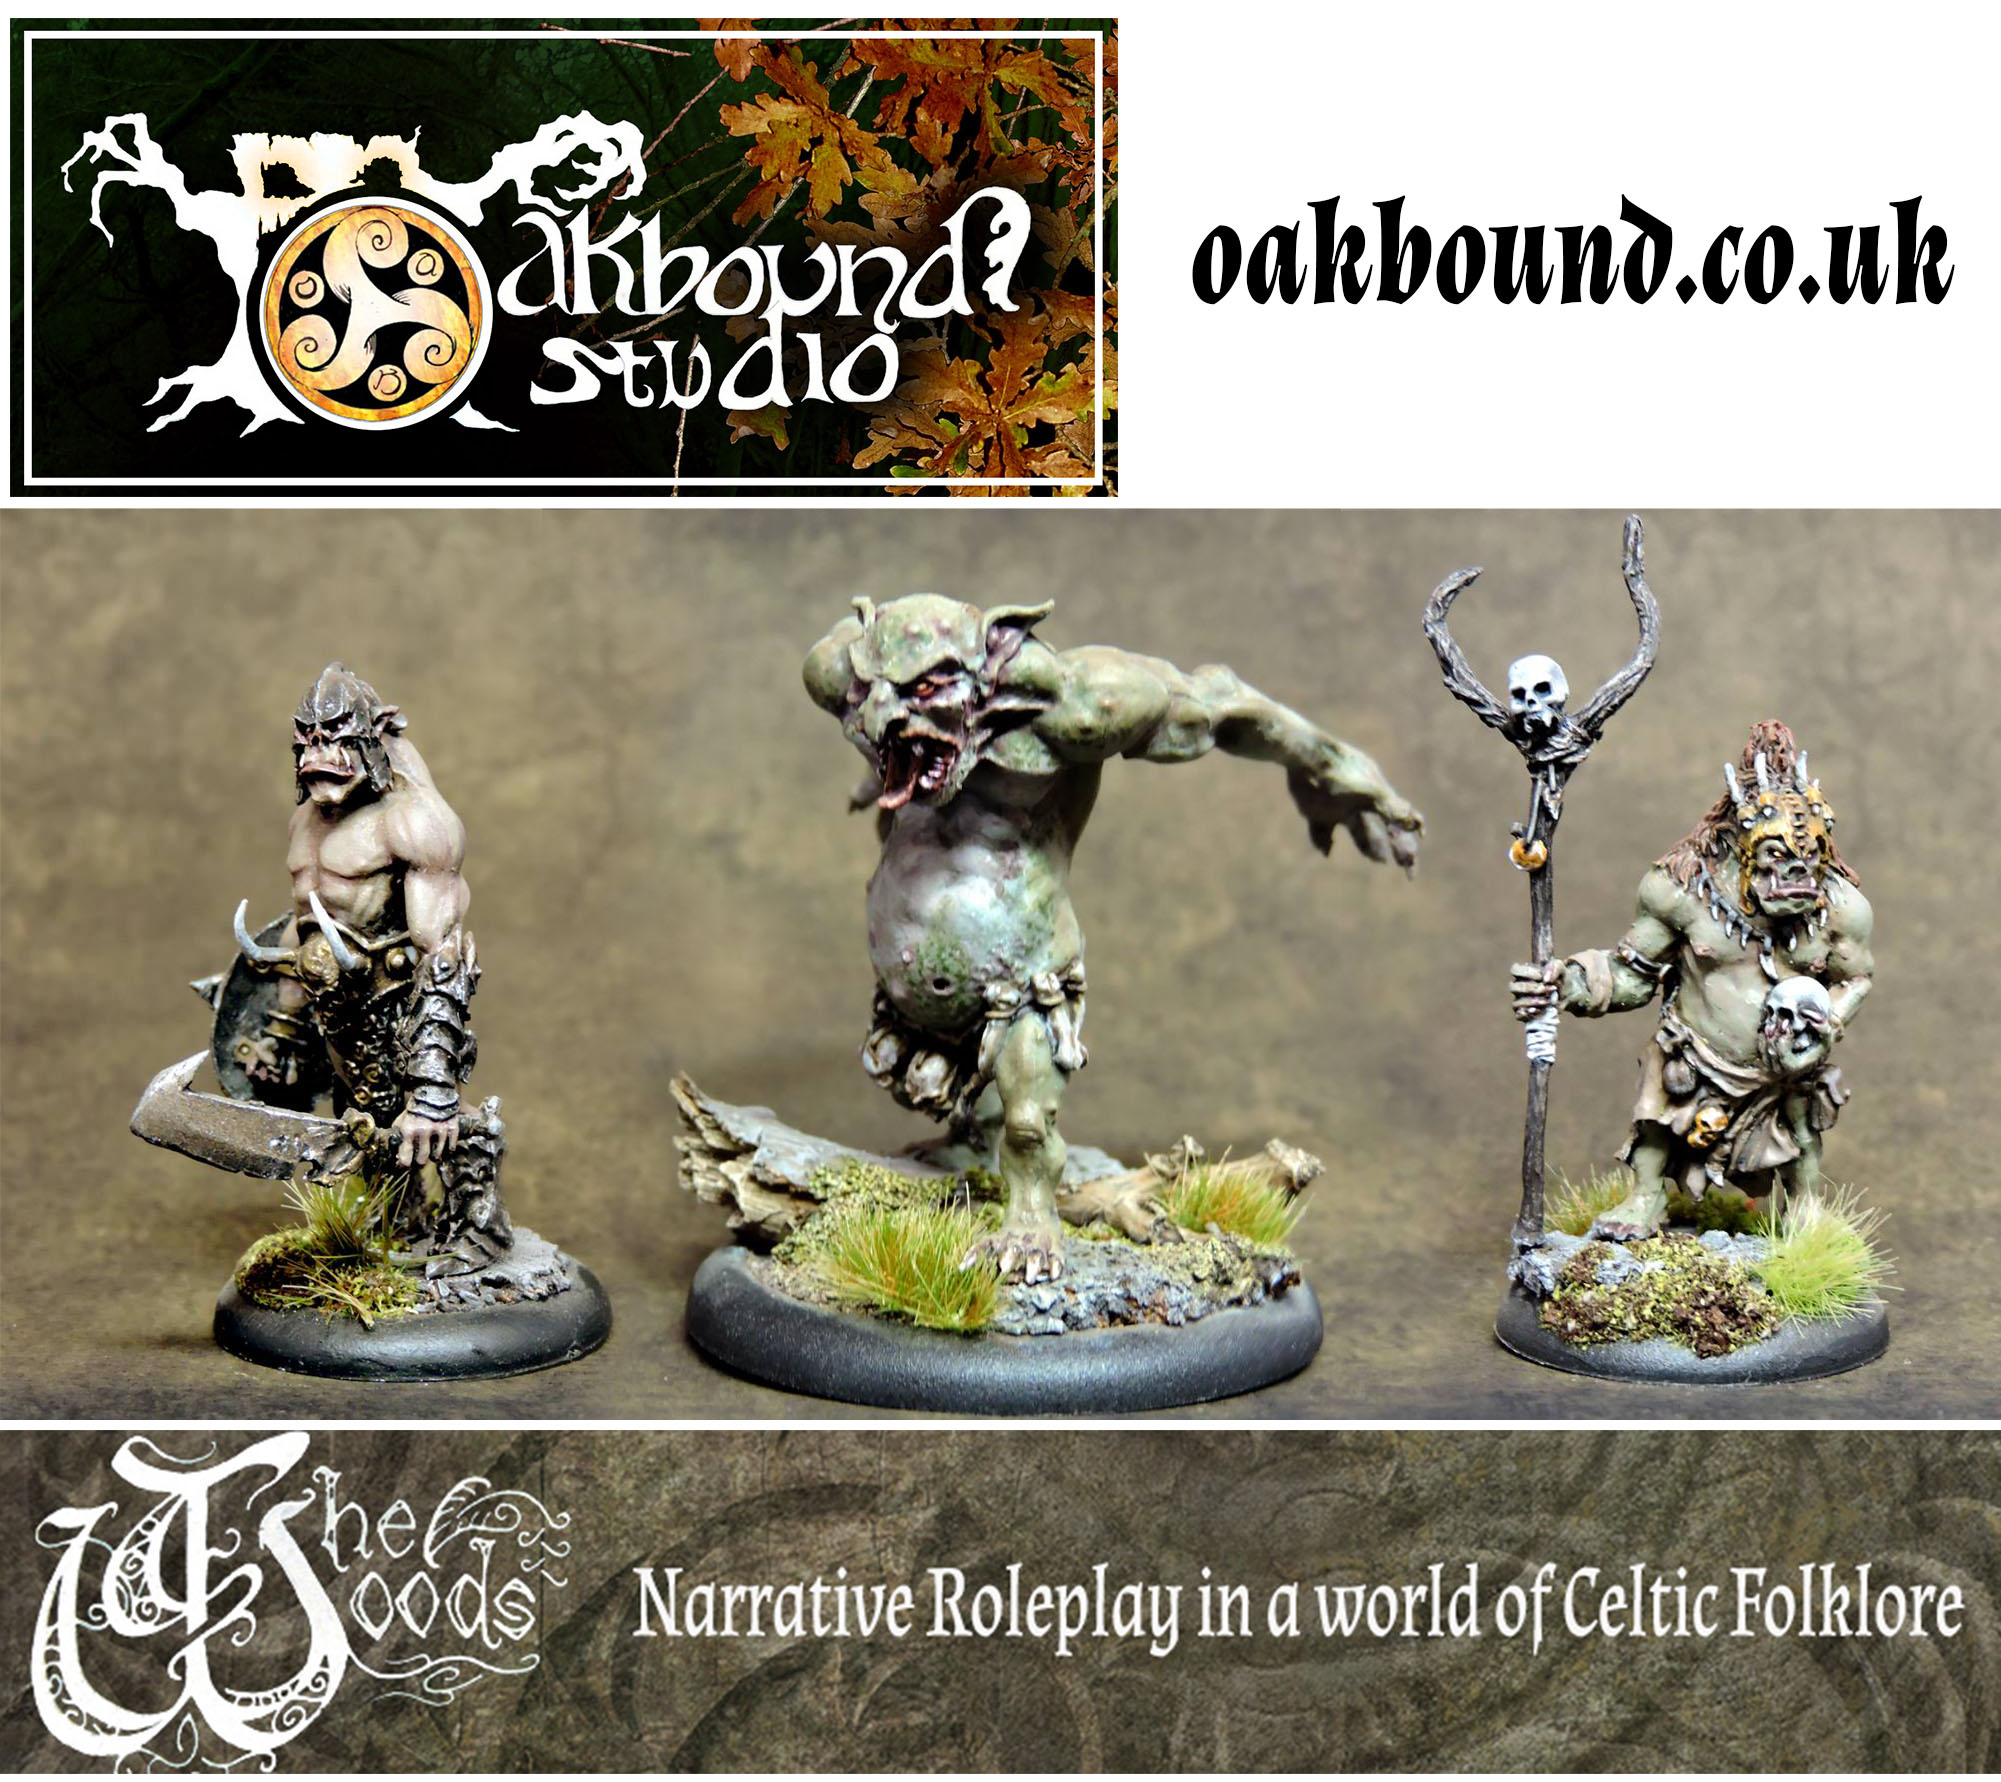 New year’s goblins at Oakbound